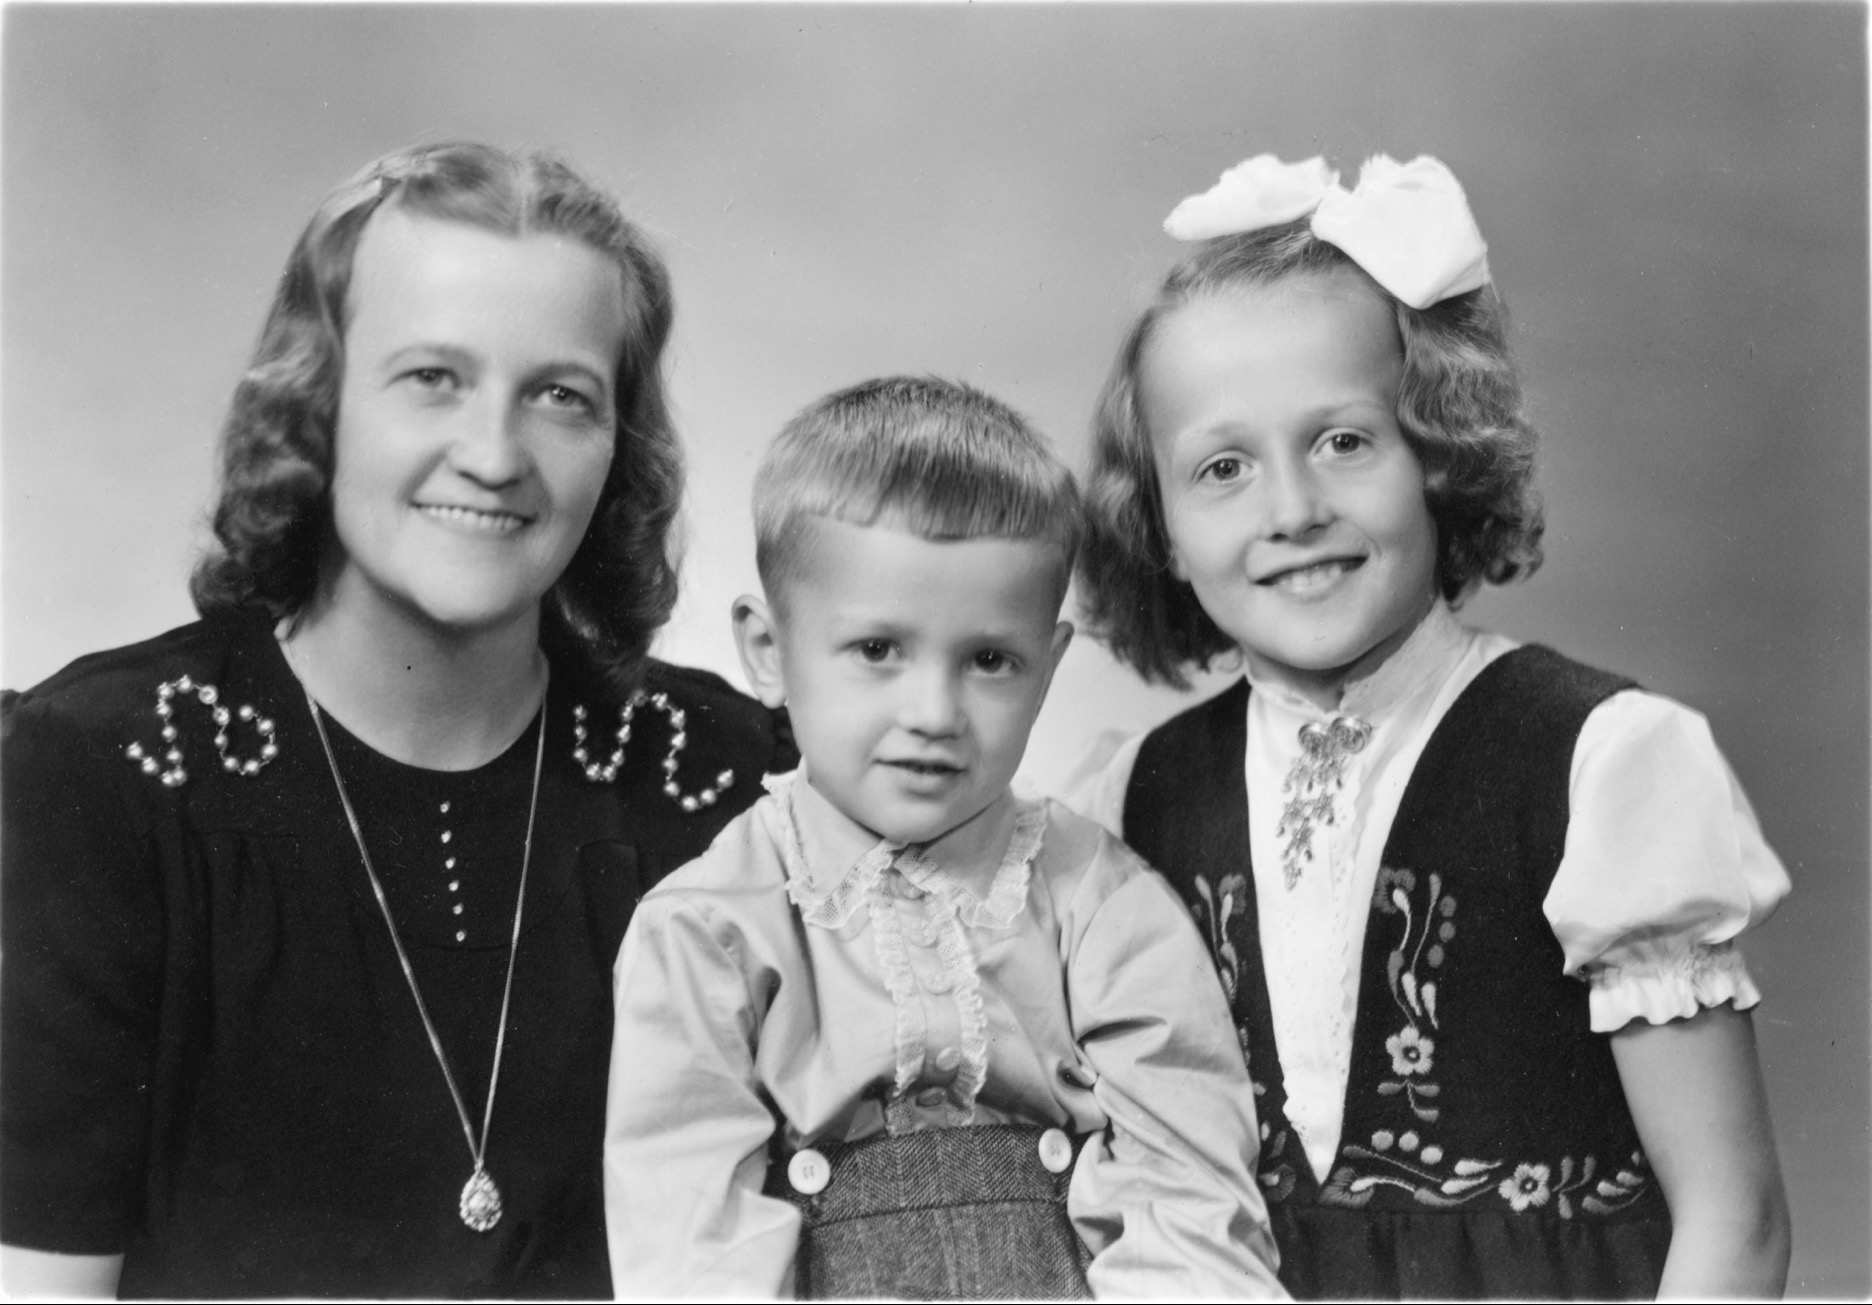 Olsen’s maternal grandmother with her two children the same year both children got polio.